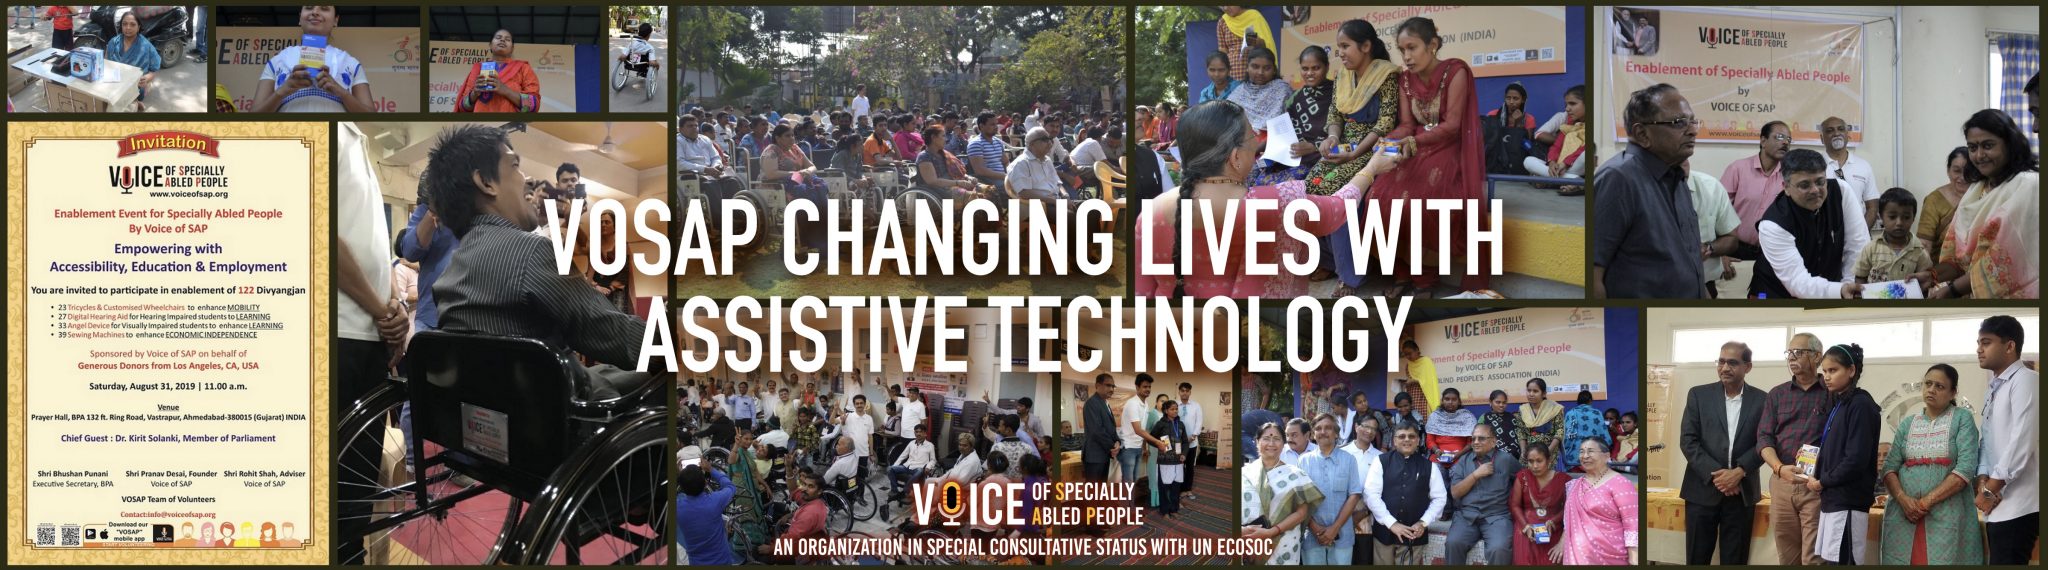 VOSAP changing lives with assistive technology